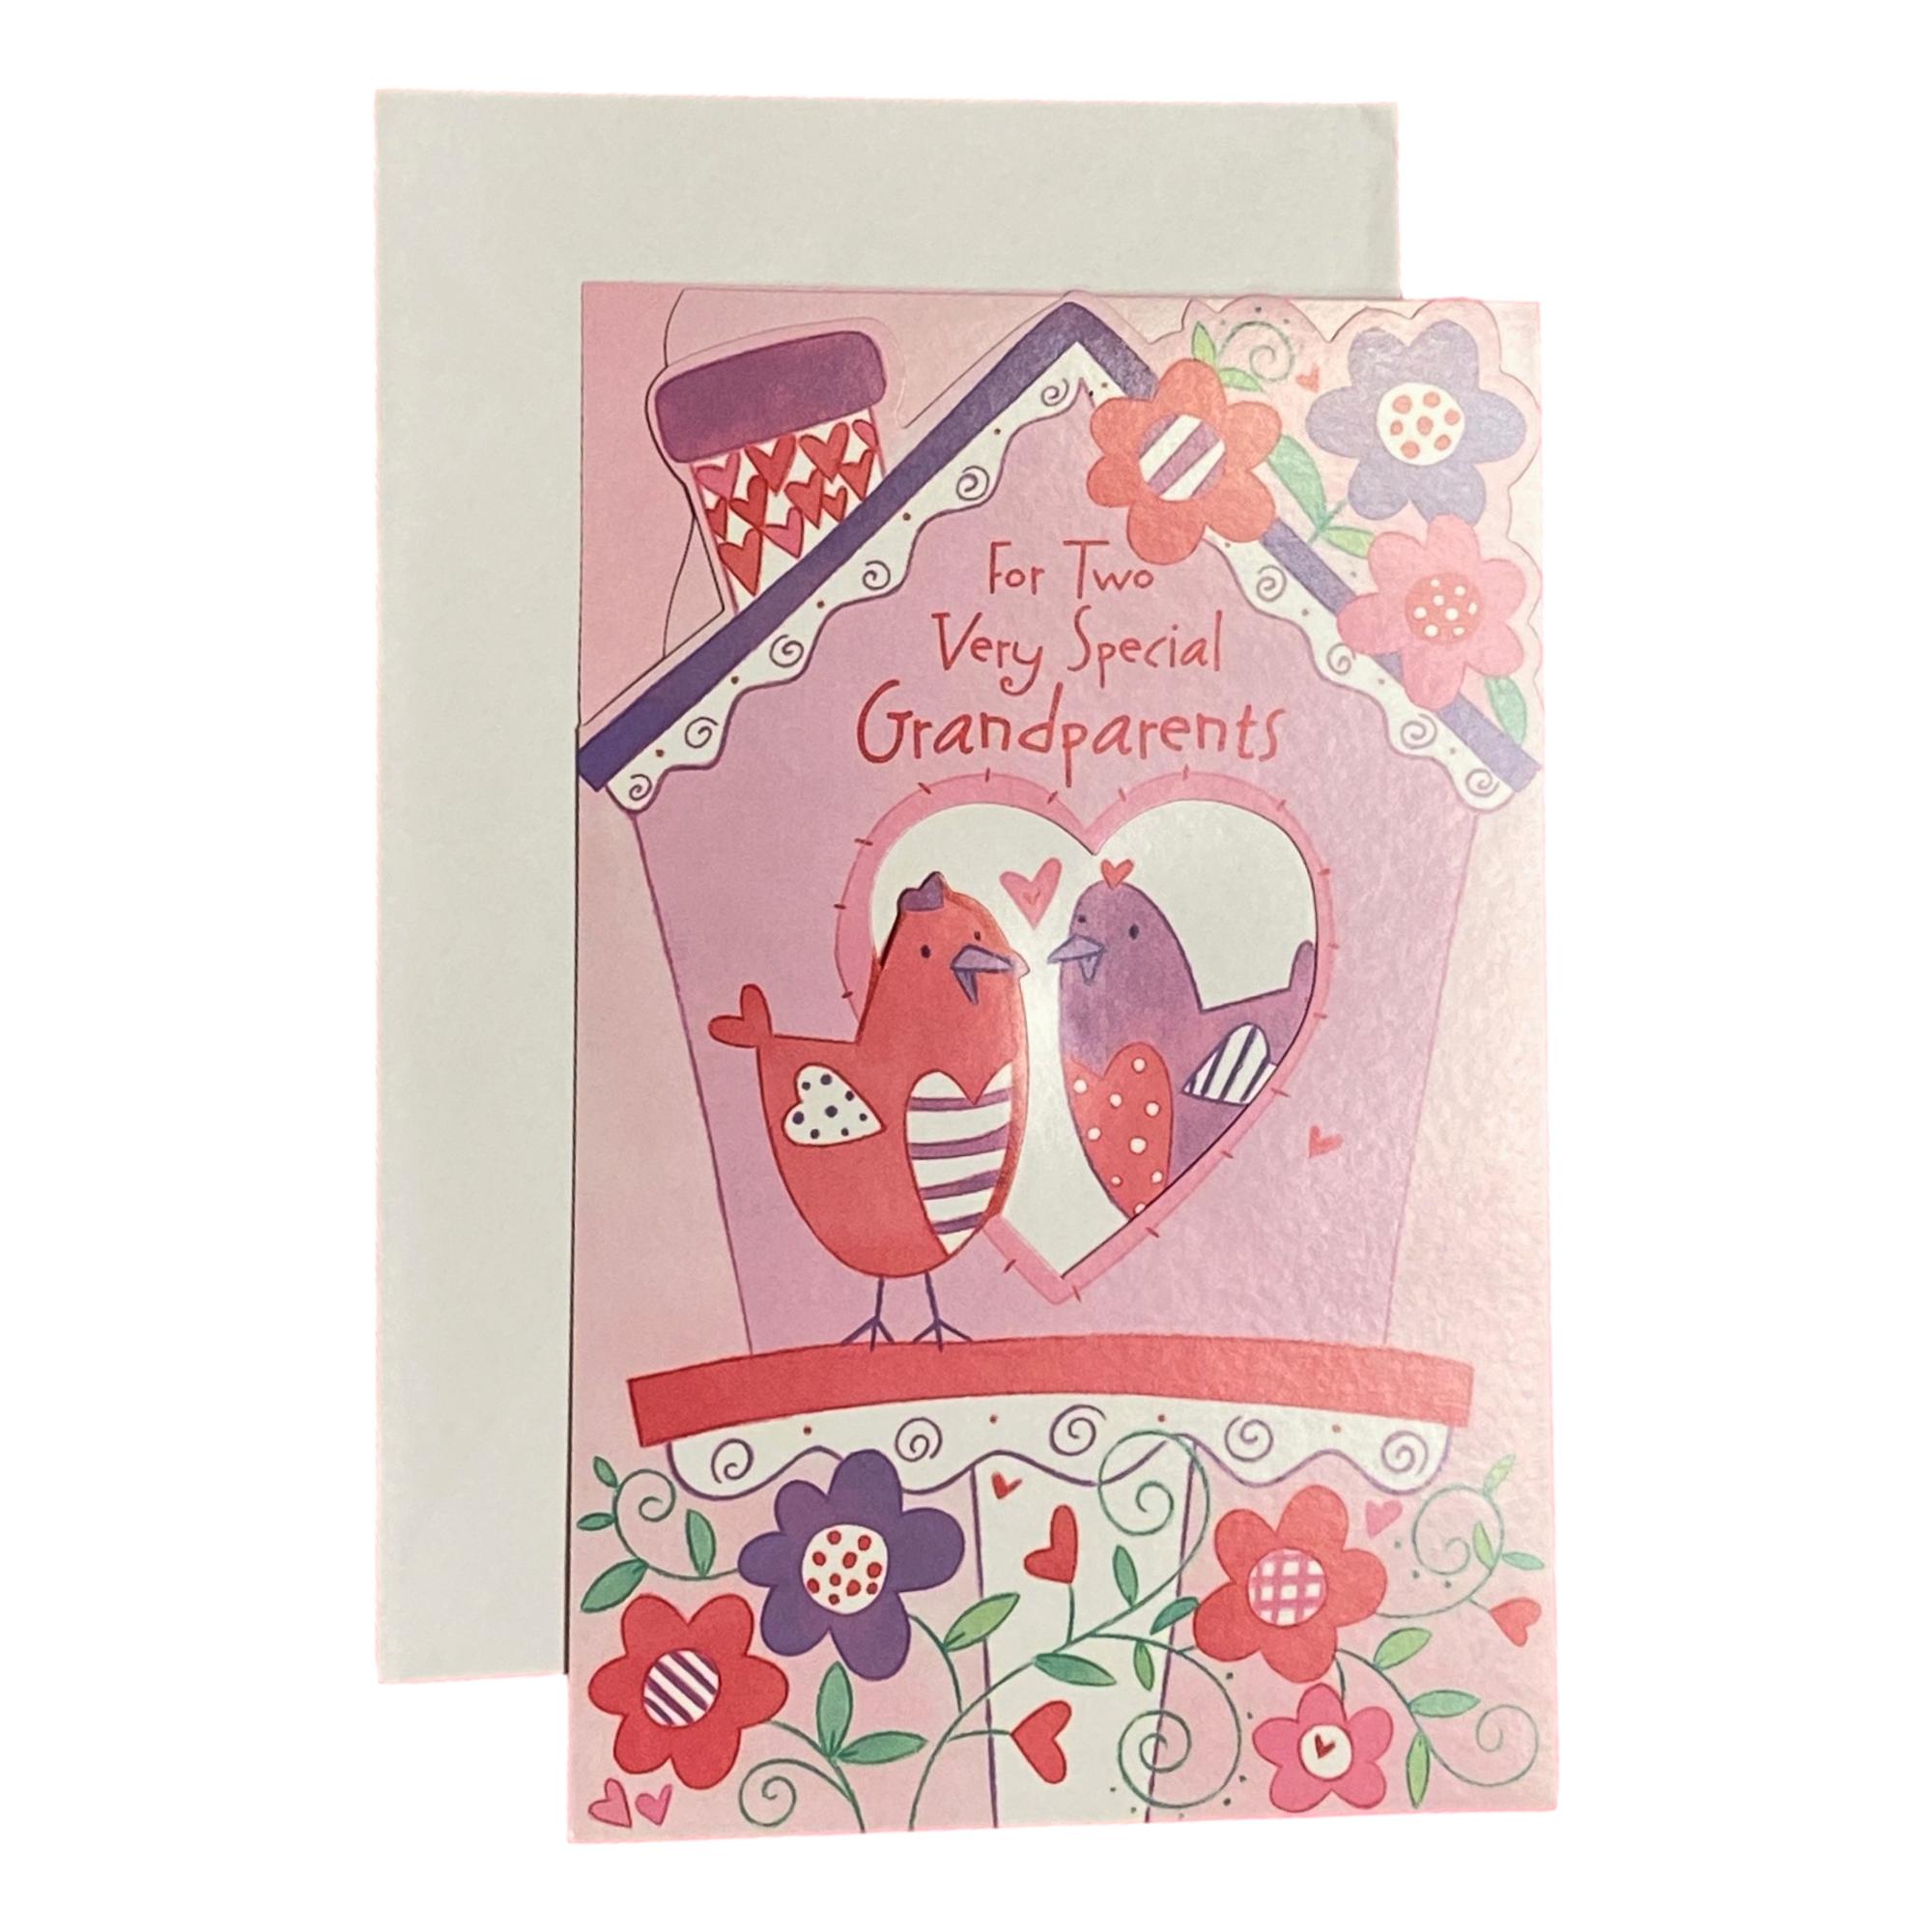 valentines-day-greeting-card-for-grandparents-for-two-very-special